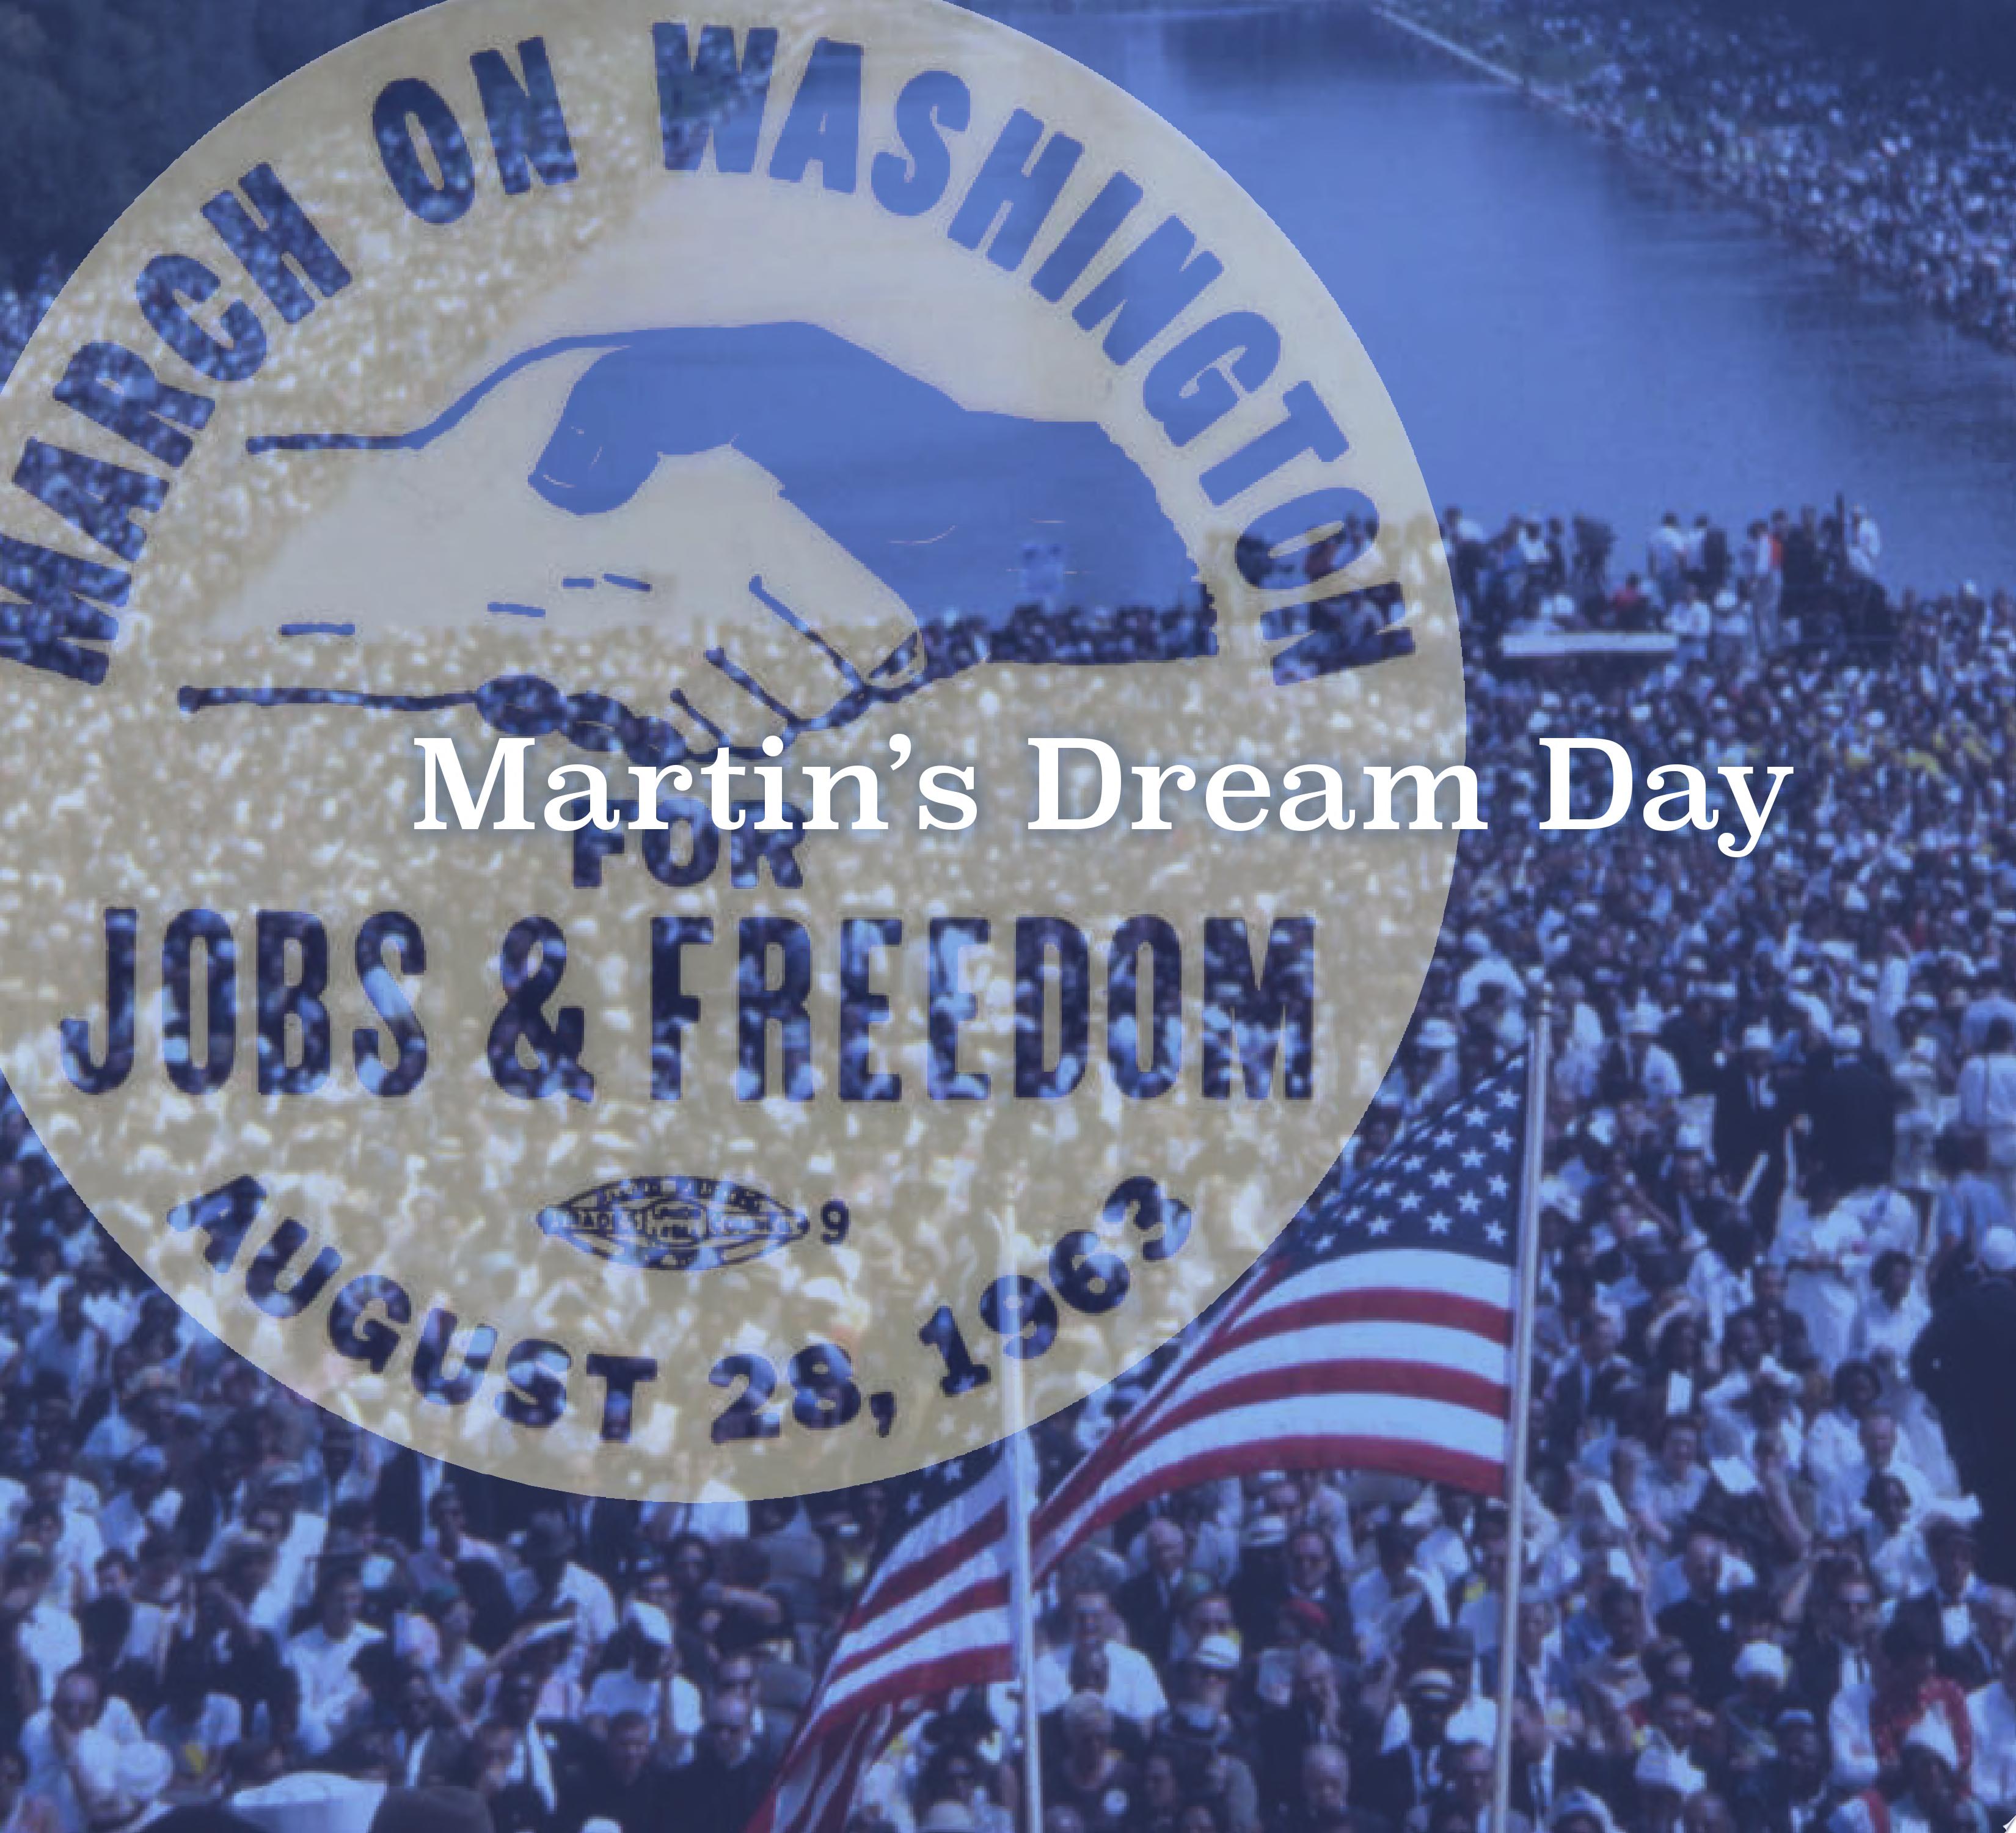 Image for "Martin&#039;s Dream Day"